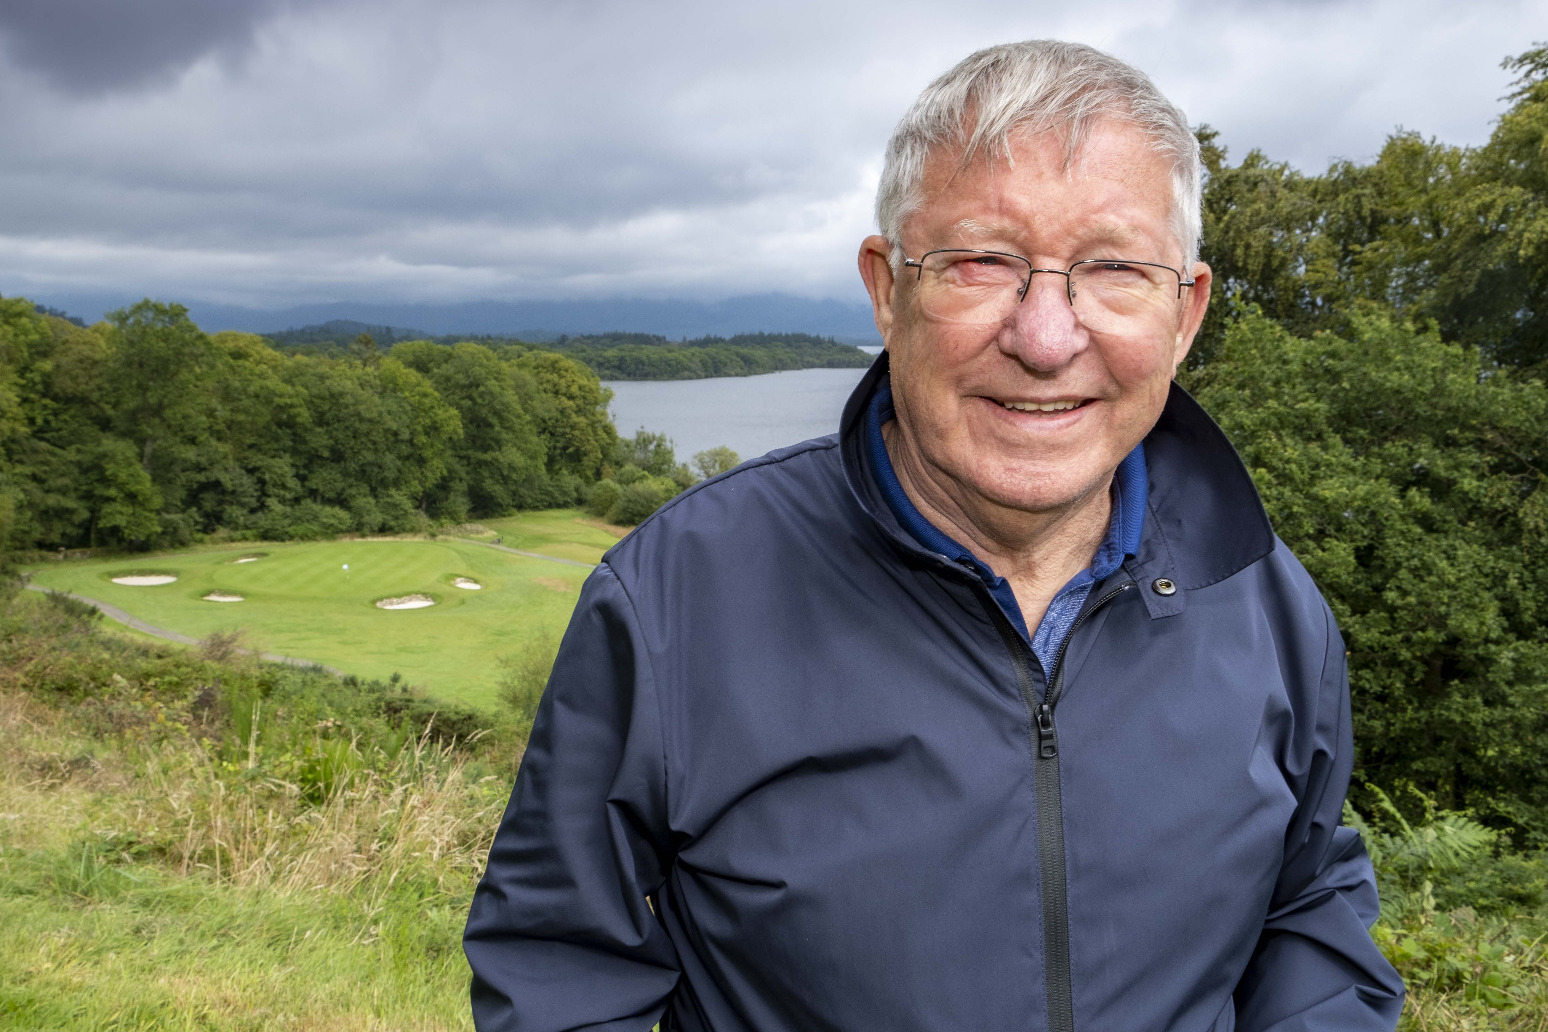 Sir Alex Ferguson hosts golf tournament to raise funds for students 